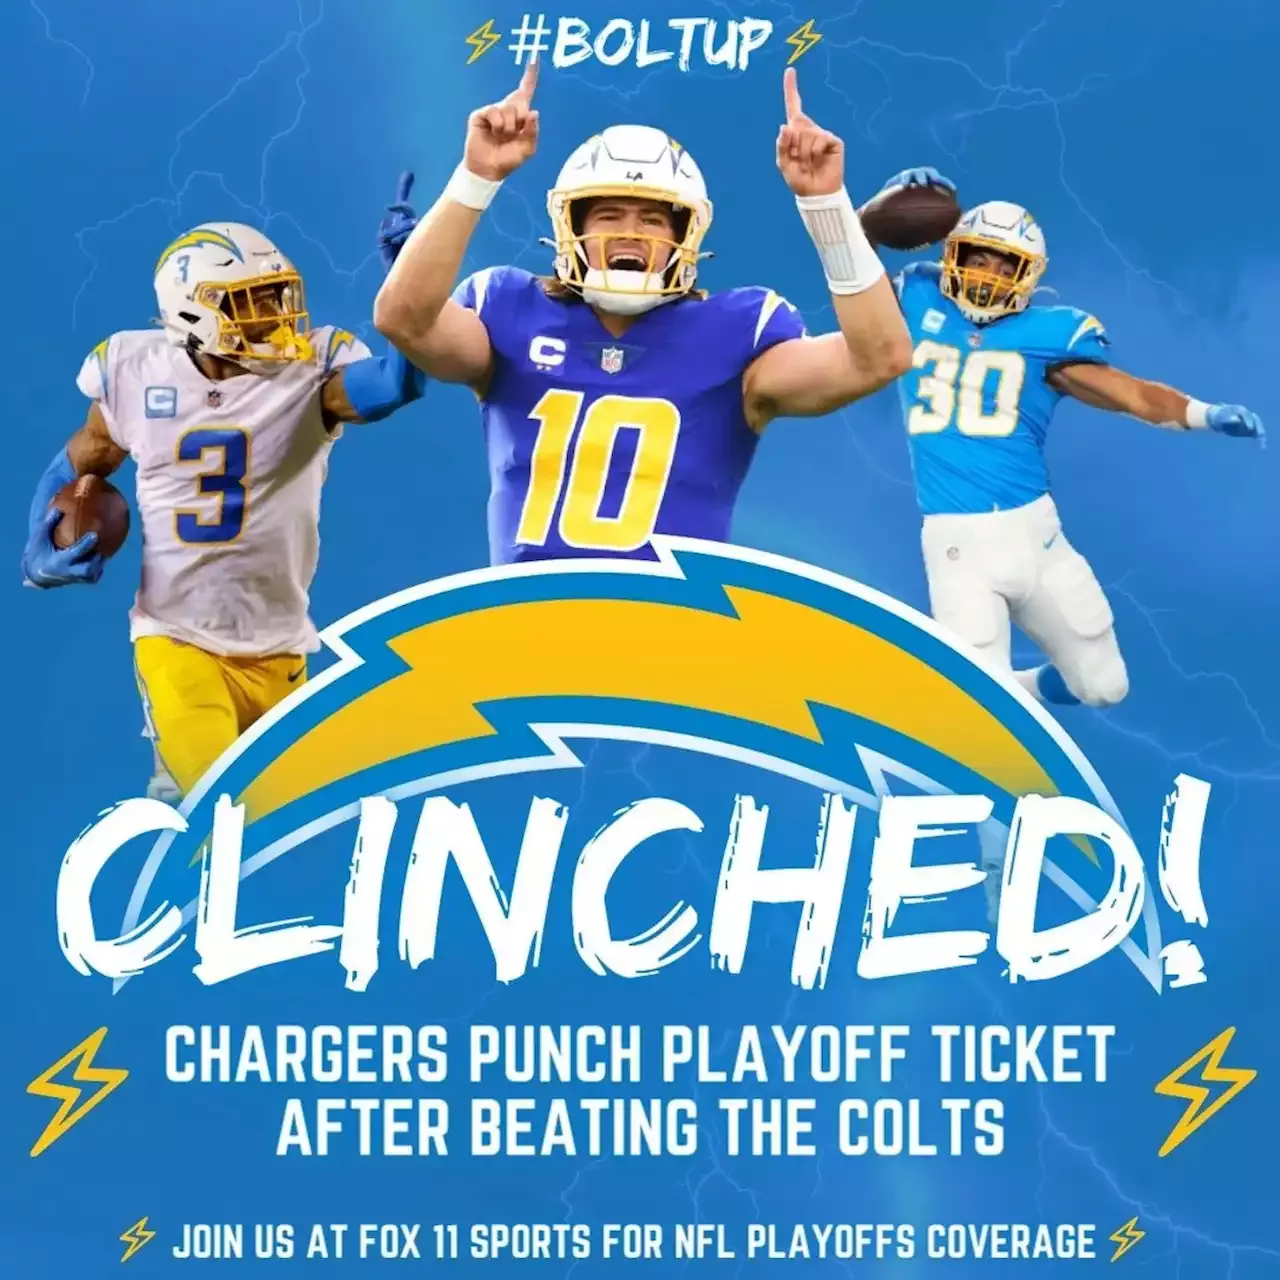 Chargers punch playoff ticket after cruising past Colts